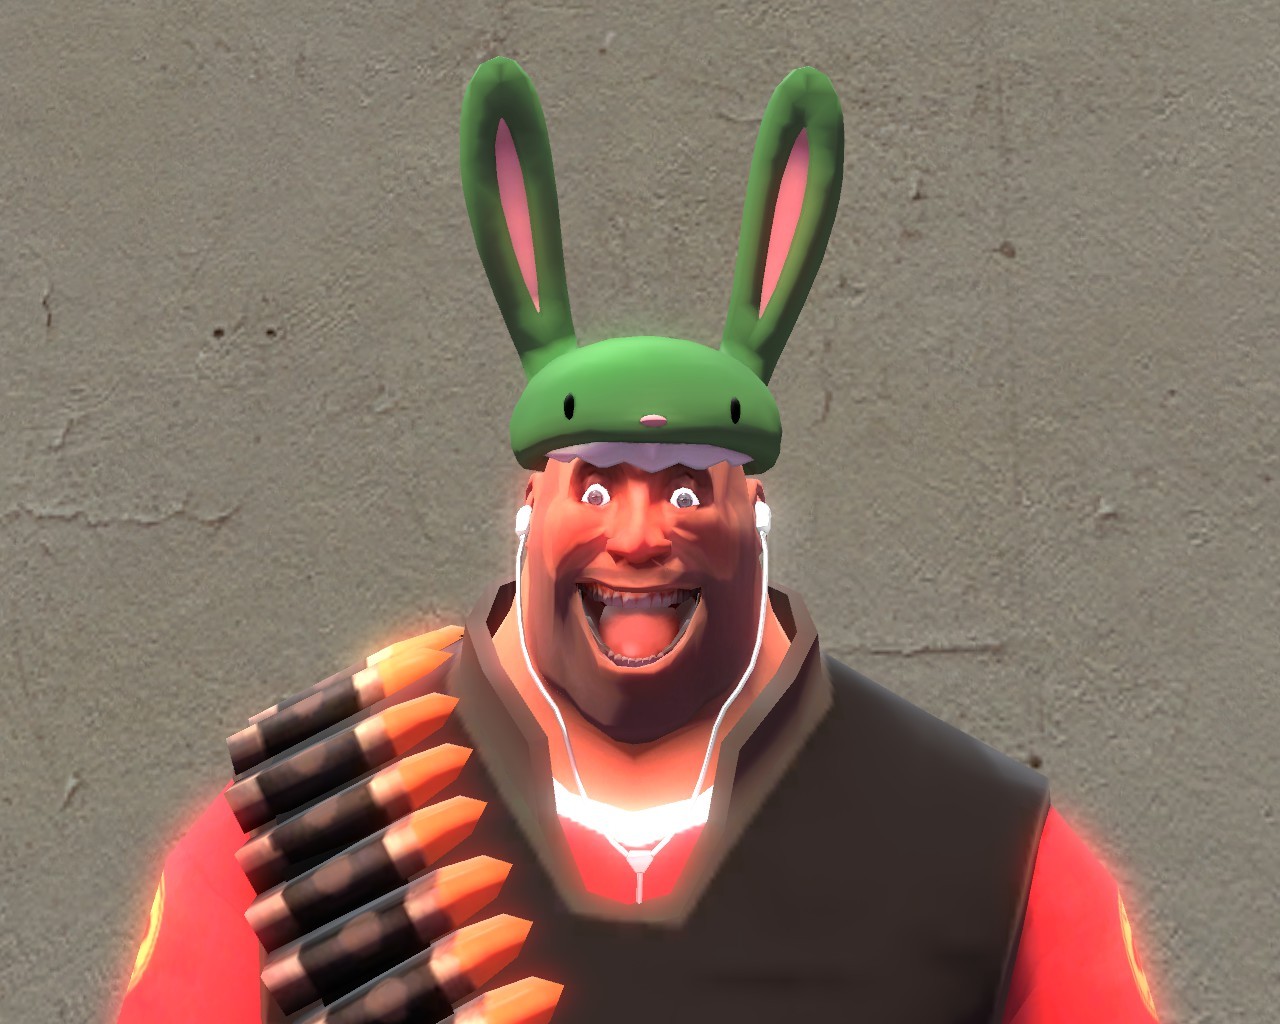 1080p Team Fortress 2 Hd Images